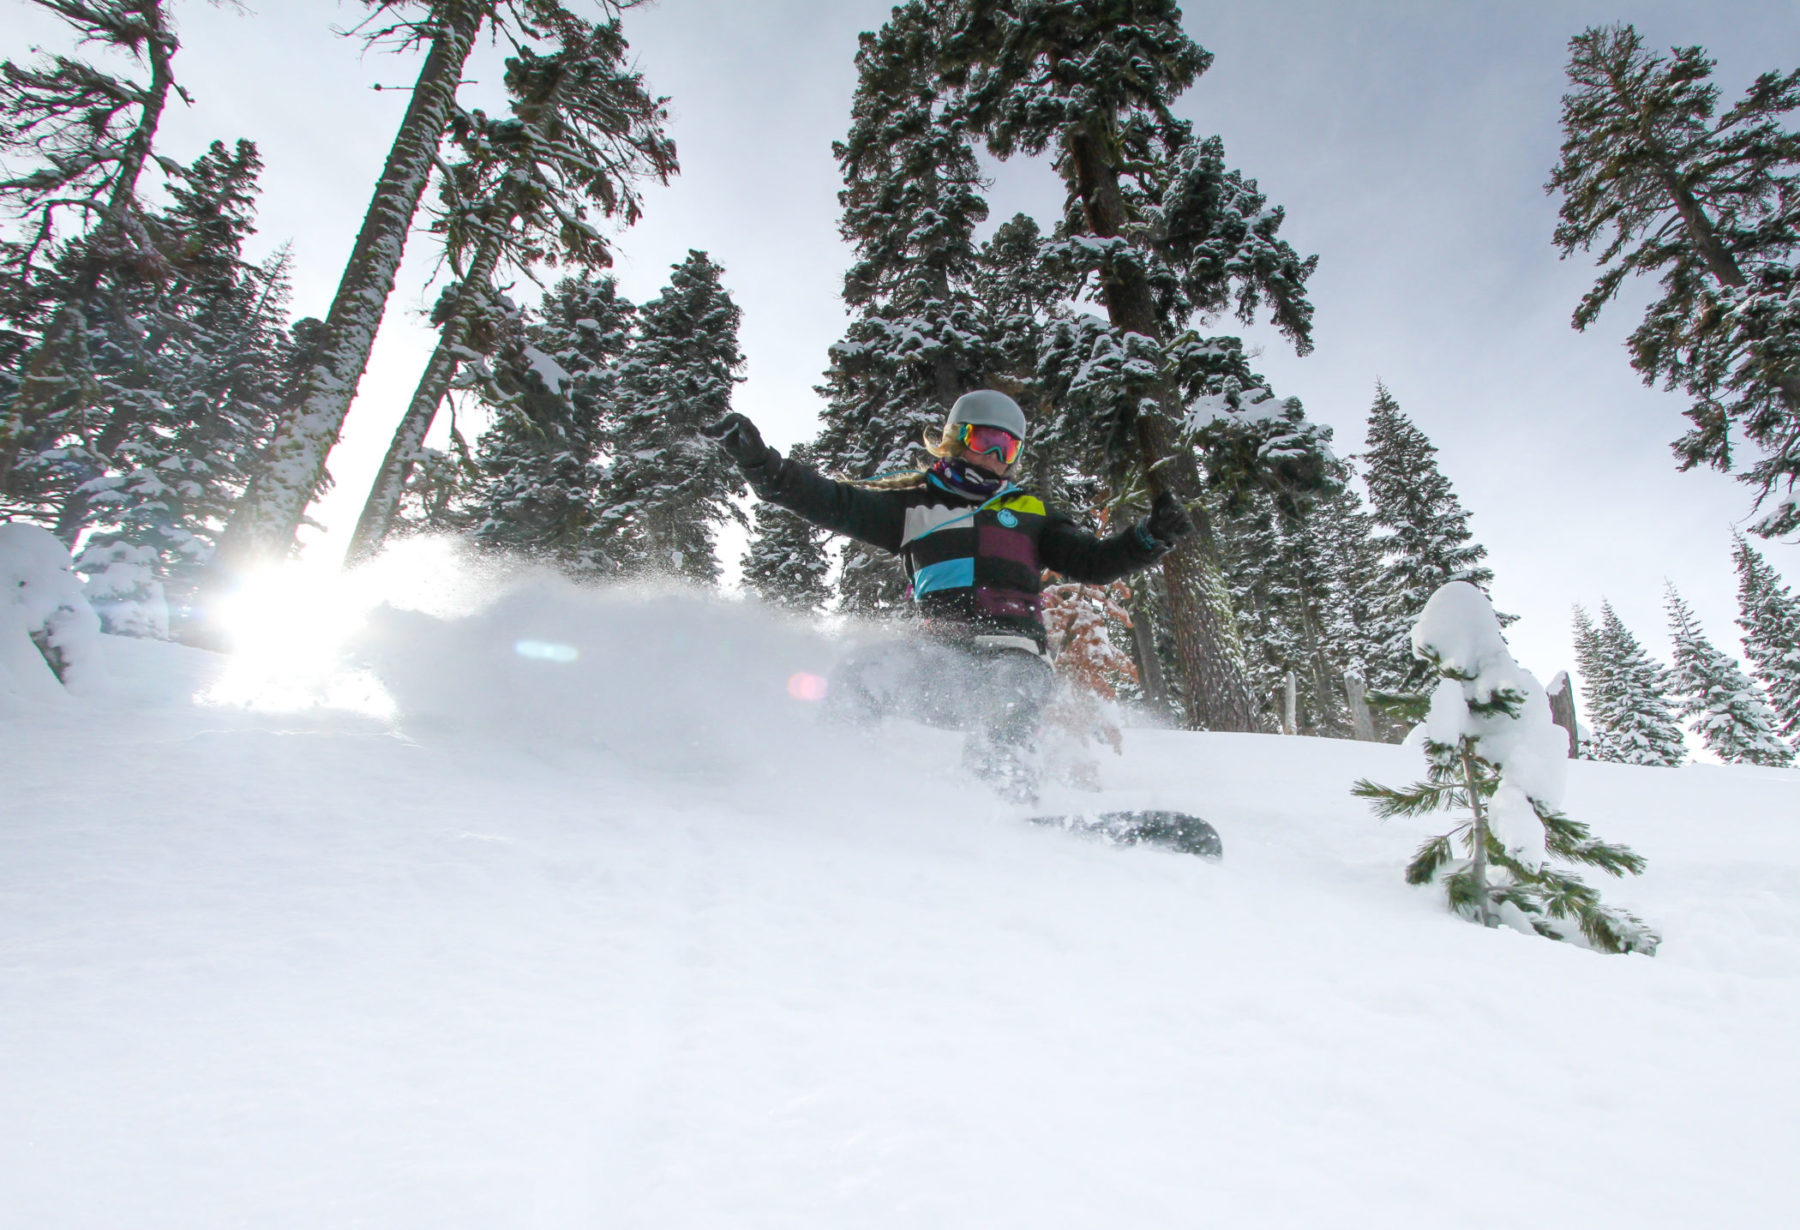 The terrain at homewood mountian resort is known for its endless powder and vast tree runs